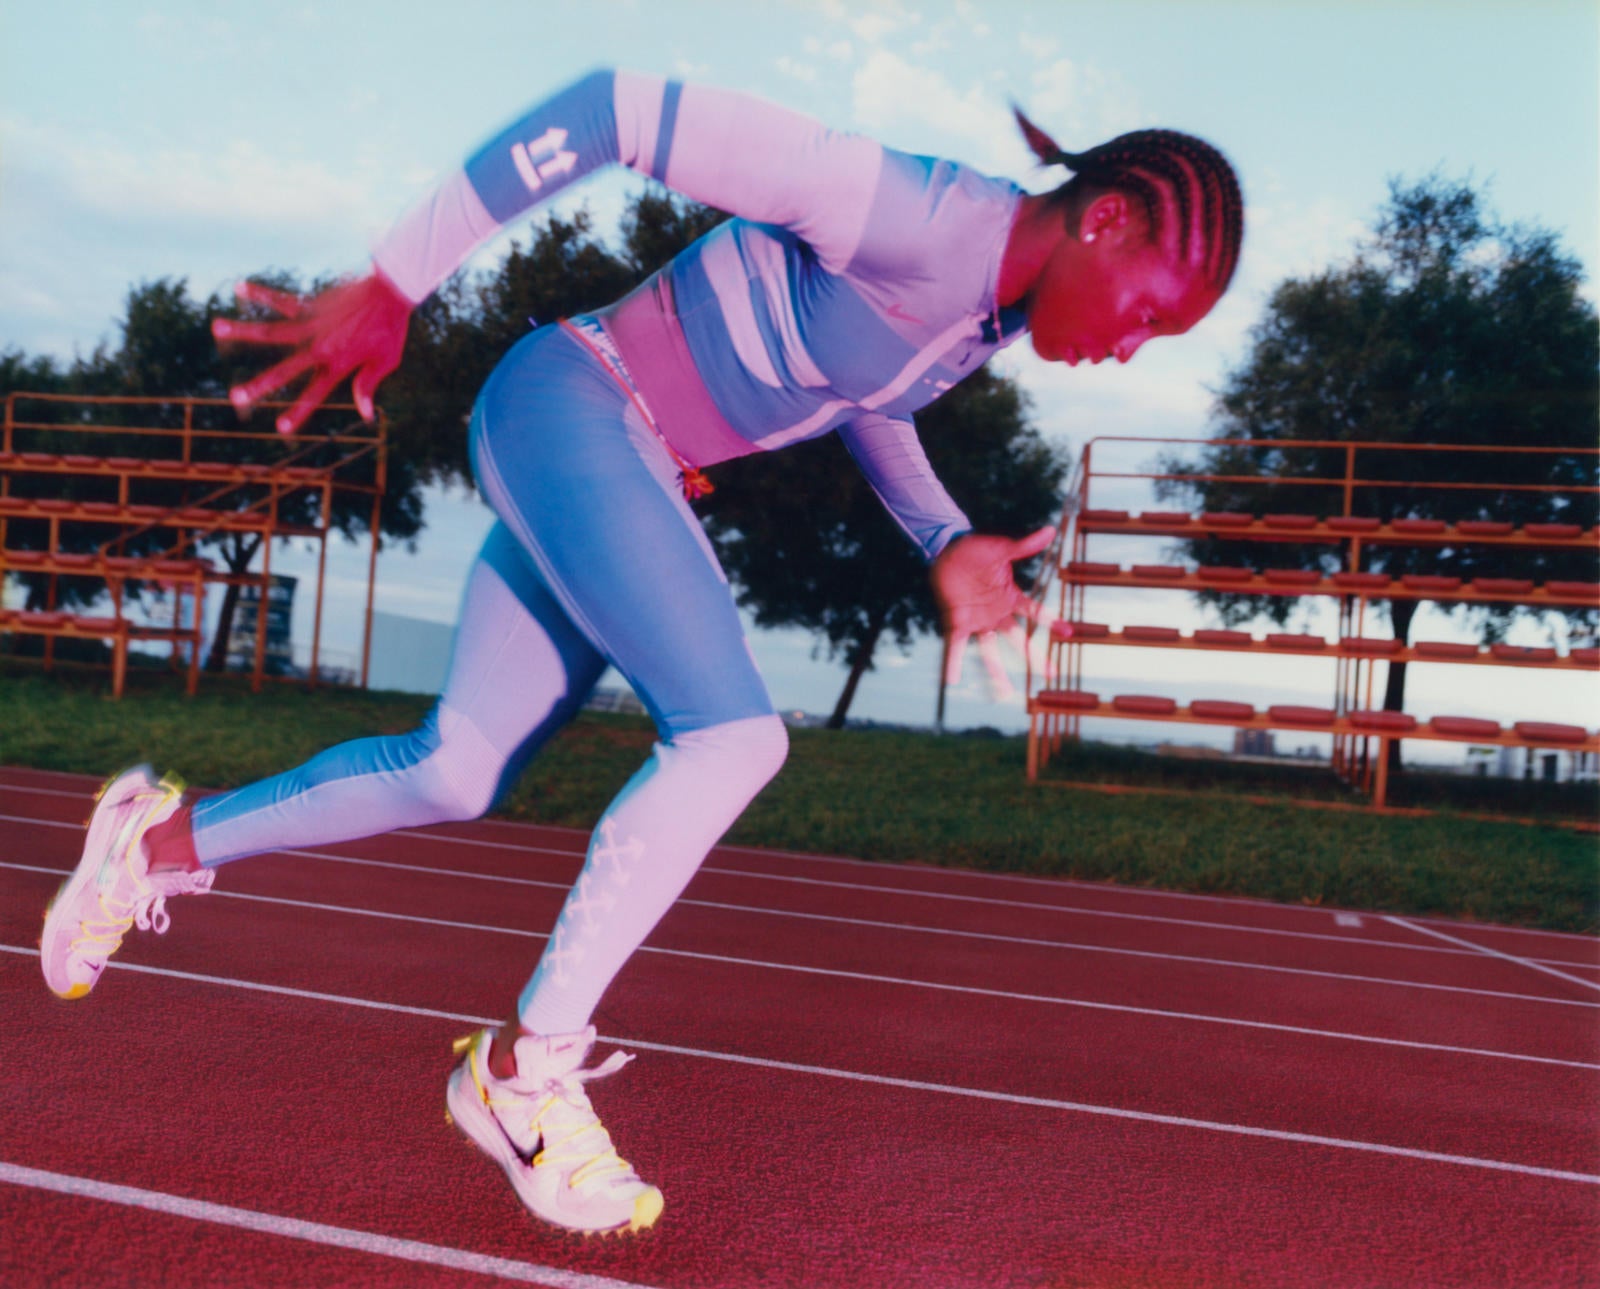 Nike x Off-White "Athlete in Progress" Women's Collection Featuring Caster Semenya card image